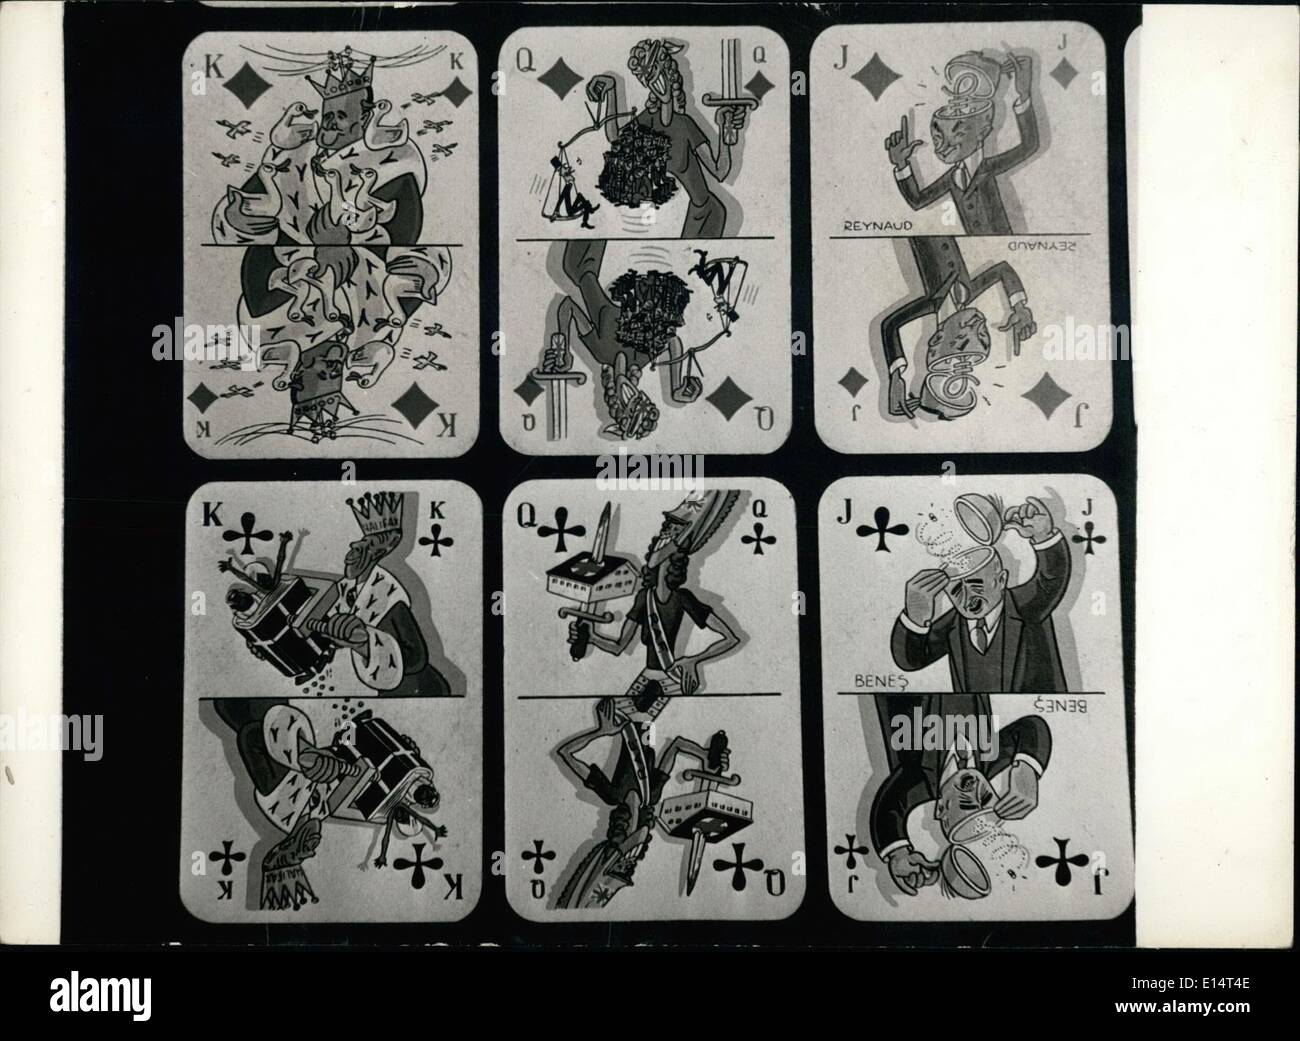 Apr. 18, 2012 - German wartime packs of playing cards: K of Diamonds is Duff Cooper receiving and sending foreign news by rigeon post. Q. of Diamonds is Britannia weighing the working class interest against capitulation, the latter being the heavies. K of Clubs, is Lord Halifax squeezing the lifeblood of the Eastern races. Two of Clubs is Britannia attacking the hospitals. Stock Photo